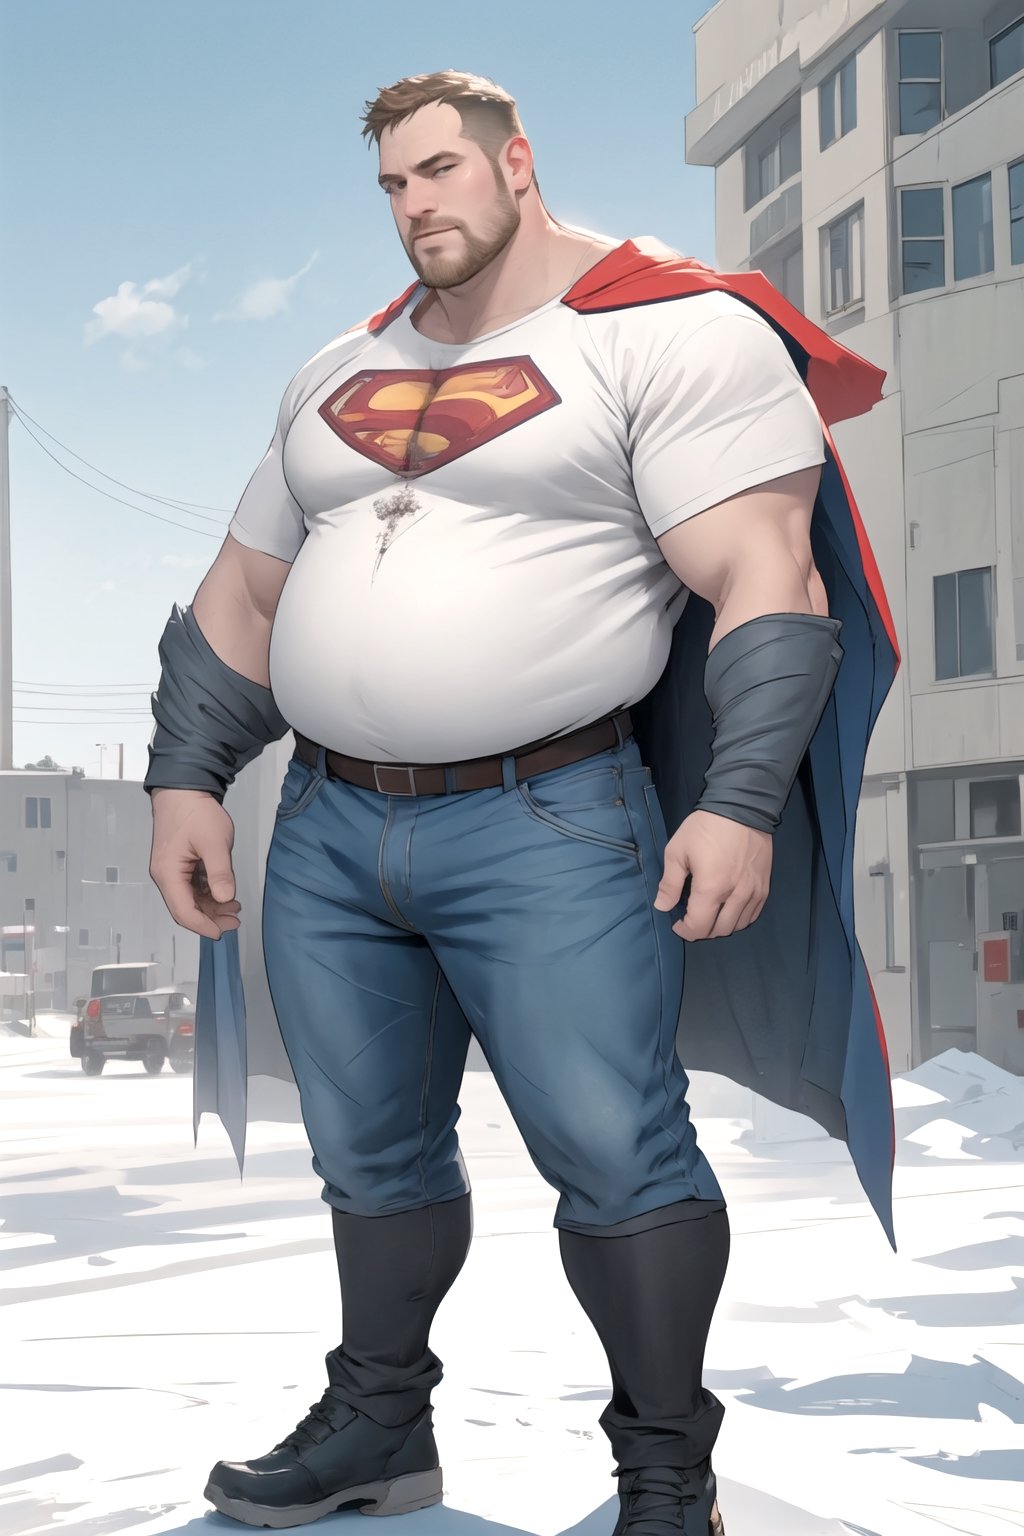 a man in a superman costume standing in the snow, gabe newell as a superman, danny devito as superman, peter griffin body type, super scale rendered, superman pose, superman, inspired by Mark Zug, buff man, superhero body, super buff and cool, peter griffin in real life, nicholas cage as superman, fat batman, peter griffin as a real person